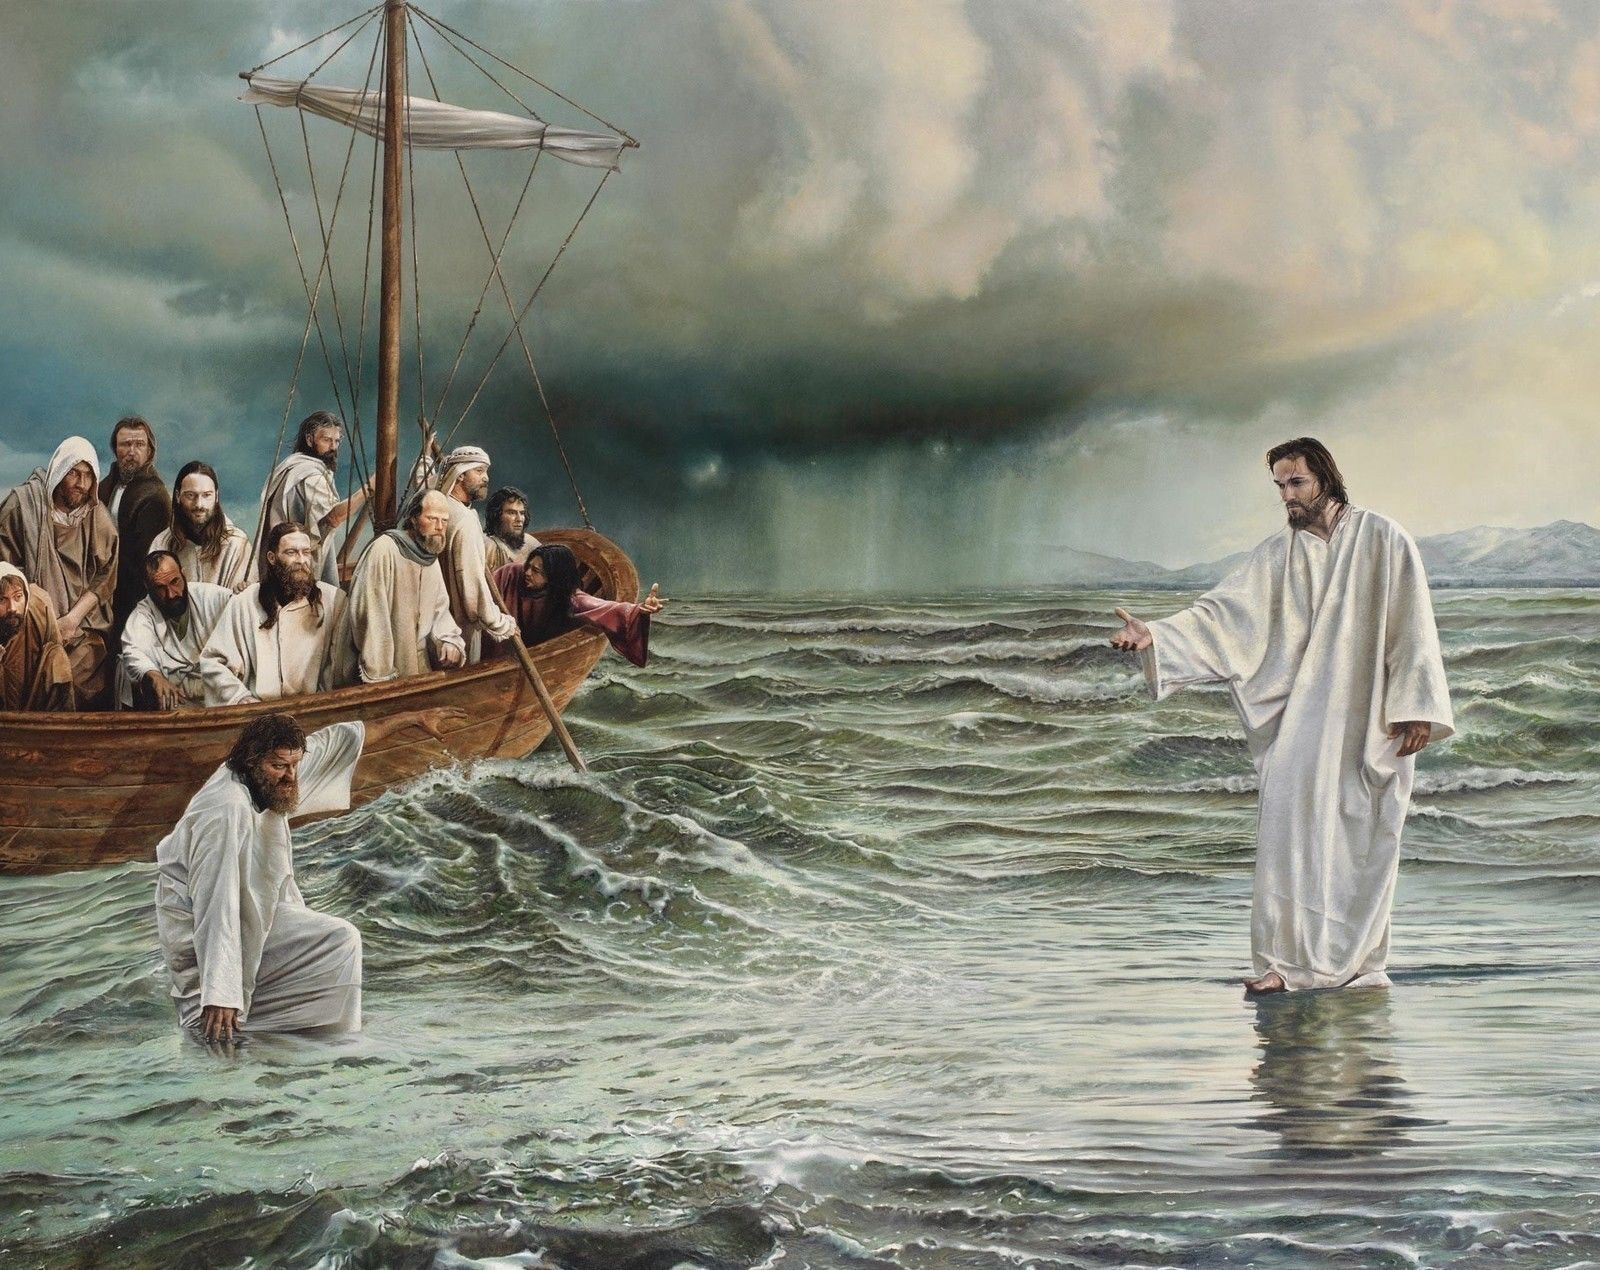 JESUS WALKING ON WATER 8X10 Photo Poster painting ART PRINT PICTURE RELIGION CHRISTIAN